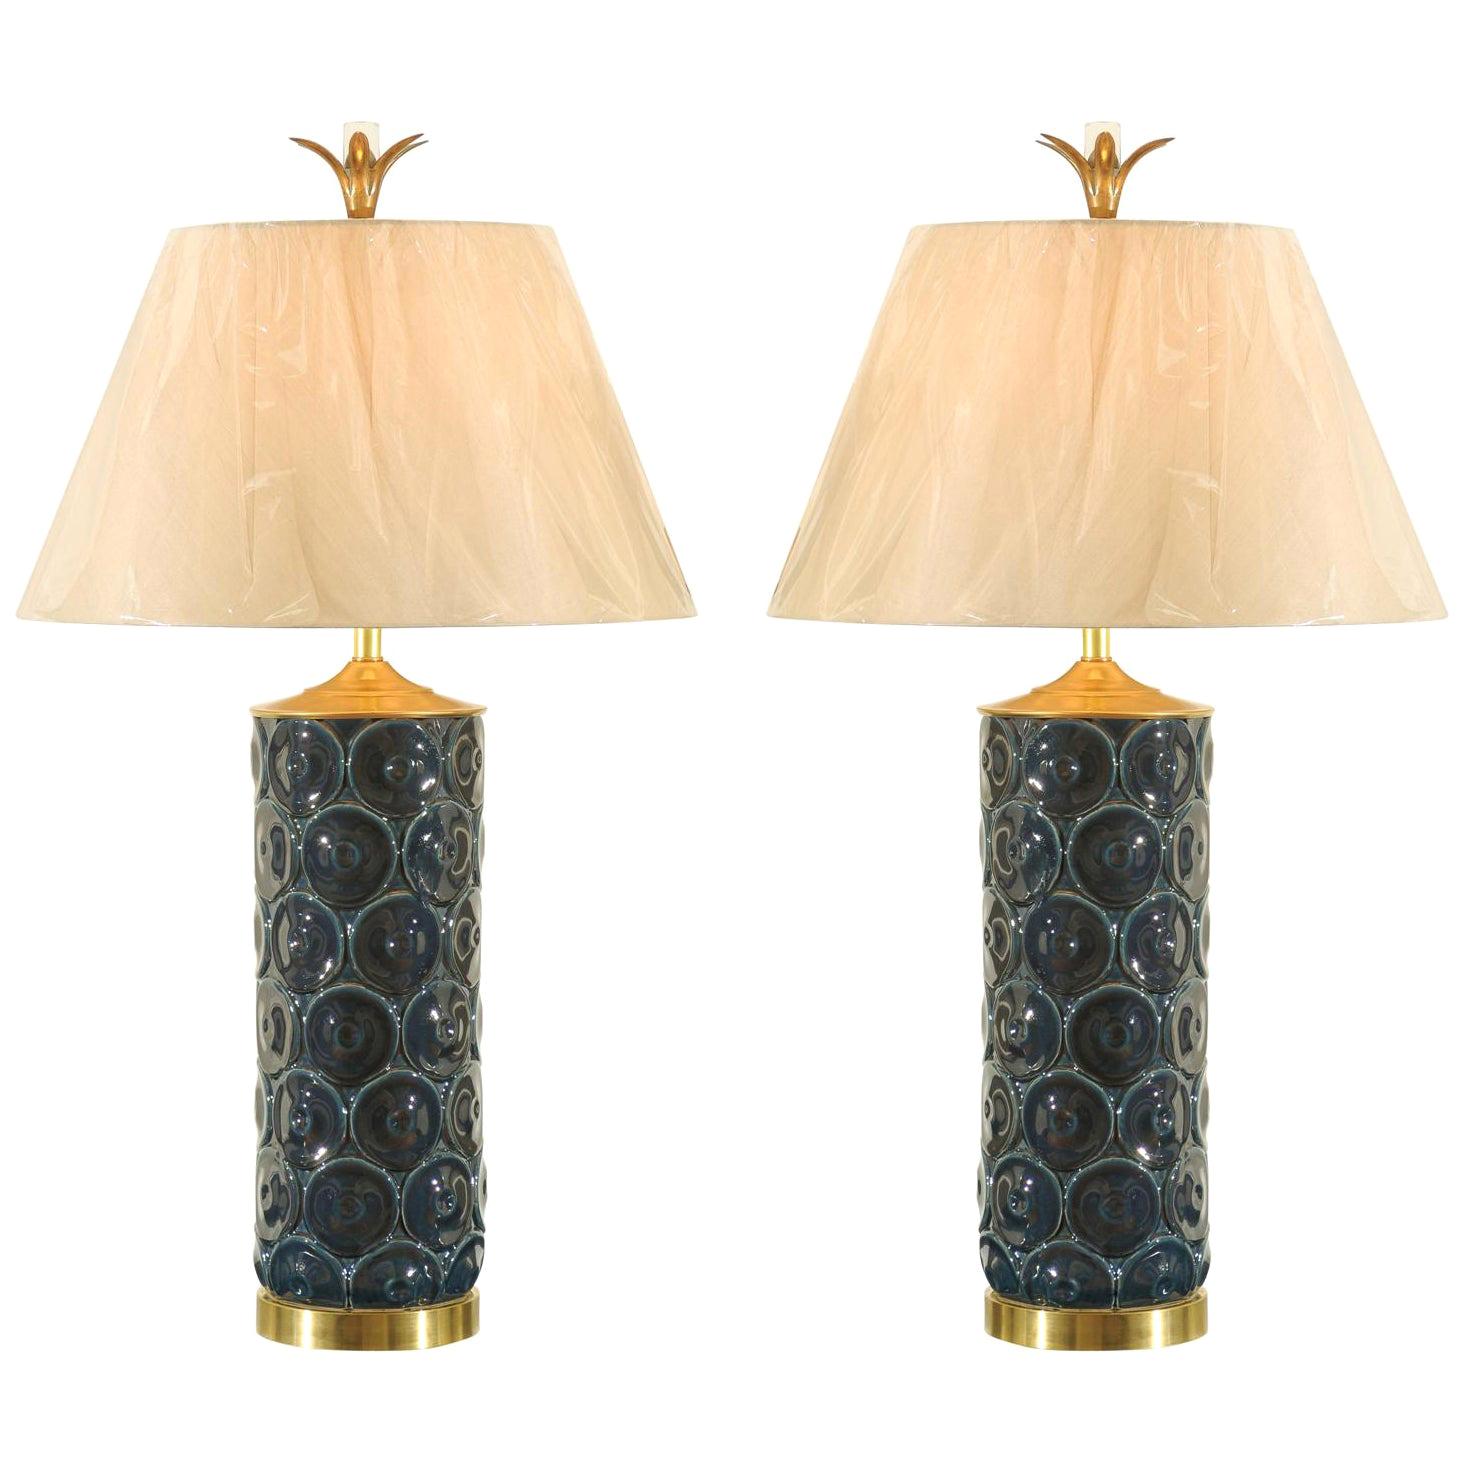 Stunning Restored Pair of Vintage Ceramic, Brass and Lucite Lamps, circa 1970